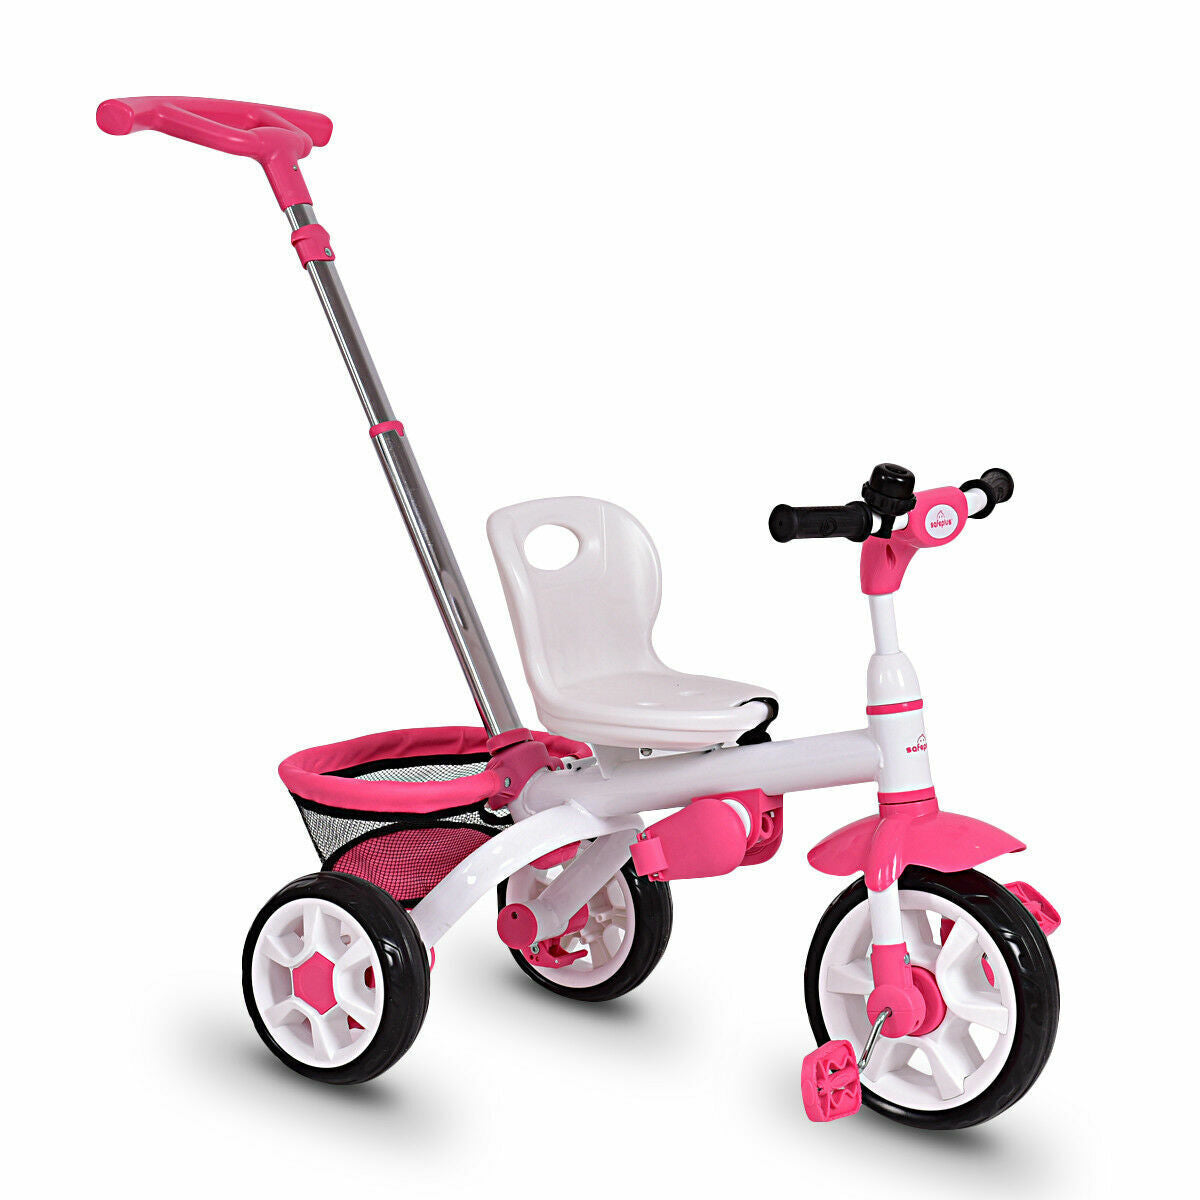 Kids Baby Stroller Tricycle Bike with Canopy and Basket Toy Pink